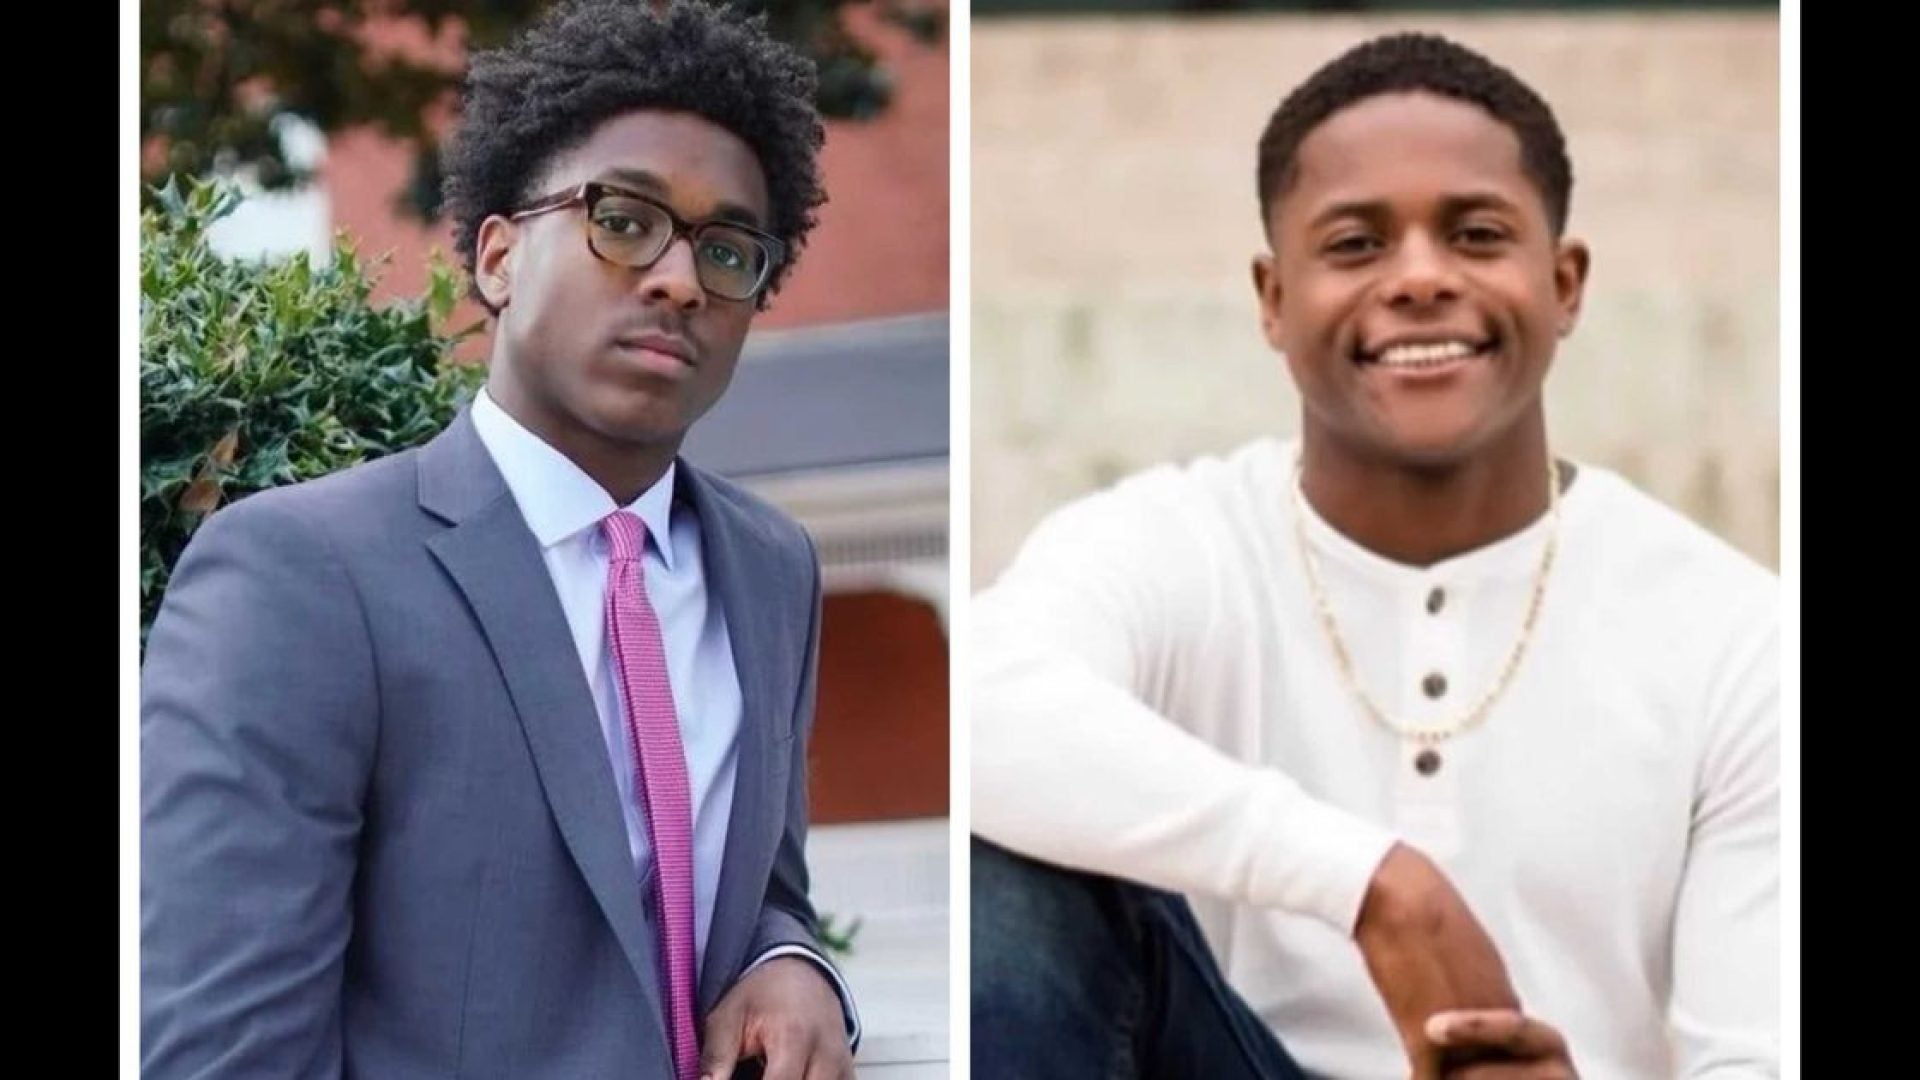 Two Morehouse College Students Die In Labor Day Car Crash